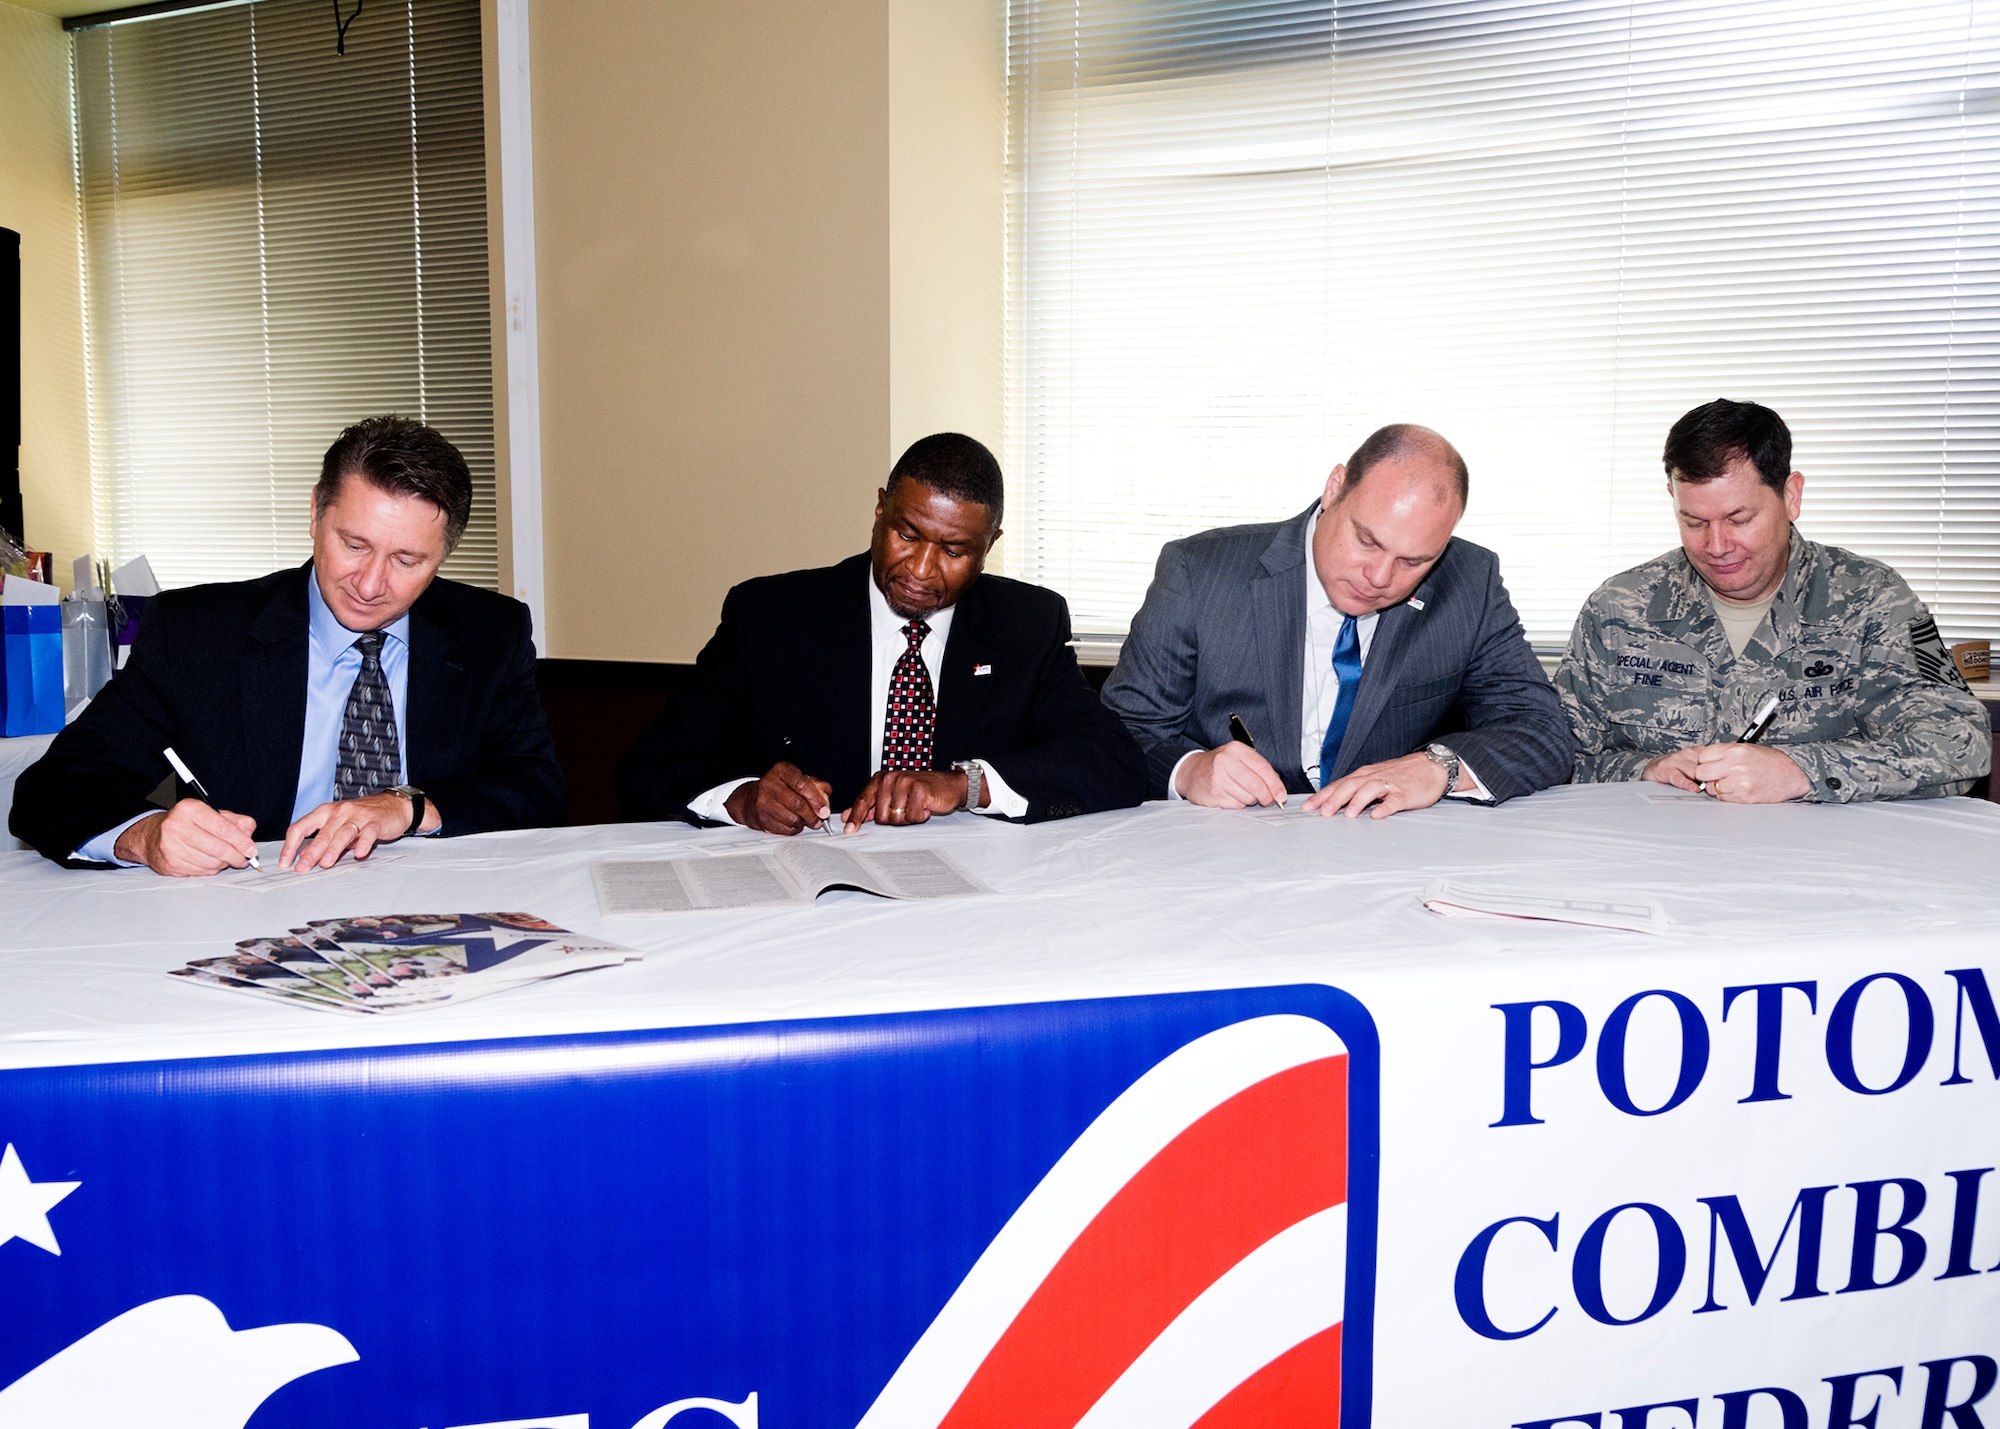 The Russell-Knox Building tenants at Quantico, Va., worked together to host a joint-Combined Federal Campaign event in the building's cafeteria. Members from the Air Force Office of Special Investigations, Naval Criminal Investigative Service, Army Criminal Investigative Service, the Defense Intelligence Agency and the Defense Security Service participated in the effort. Pictured here signing their CFC contribution forms are, from left, Mr. Michael Janosov, OSI executive director; Mr. Stan Sims, DSS director; Mr. James Kren, DSS deputy director, and Chief Master Sgt. John Fine, OSI command chief. CFC gives federal employees an opportunity to give back to the community and support various non-profit organizations. The CFC season runs from Sept. 1 through Dec. 15. (U.S. Air Force photo by Mr. Mike Hastings.)